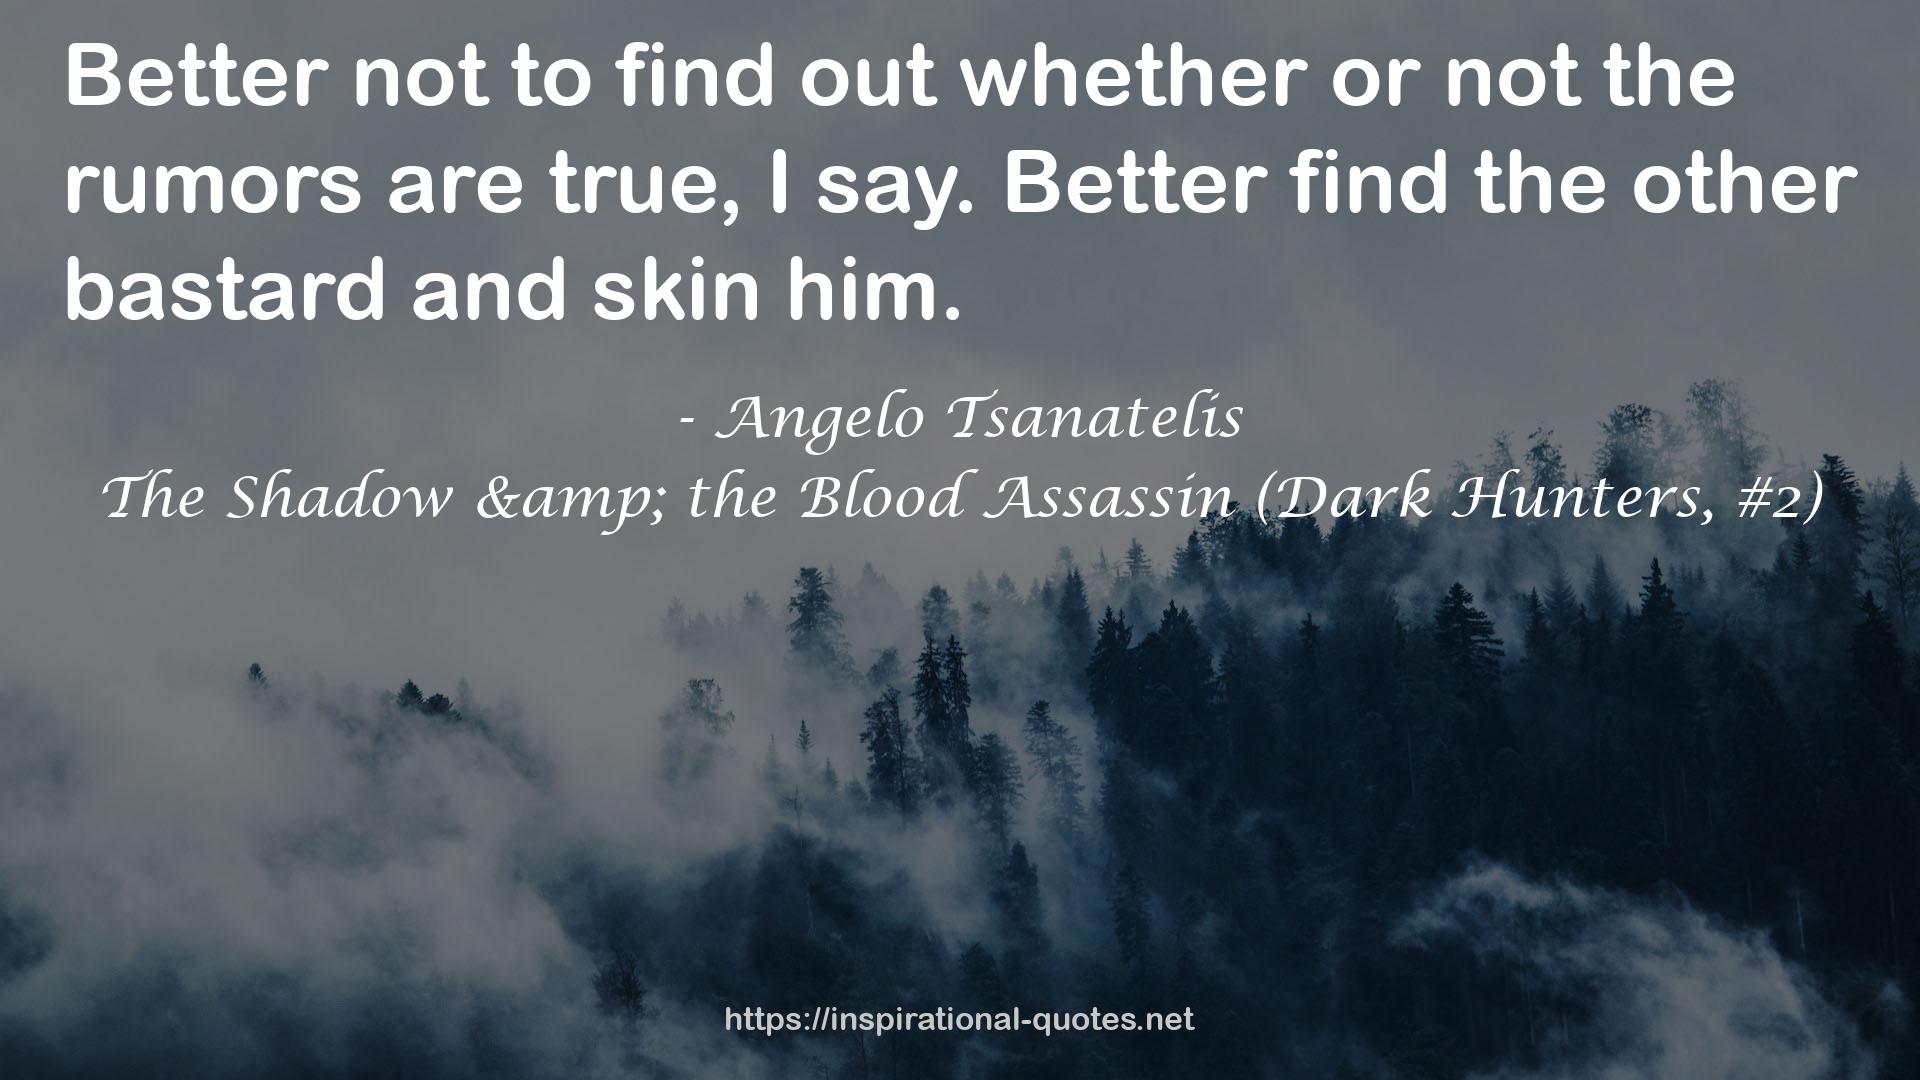 The Shadow & the Blood Assassin (Dark Hunters, #2) QUOTES